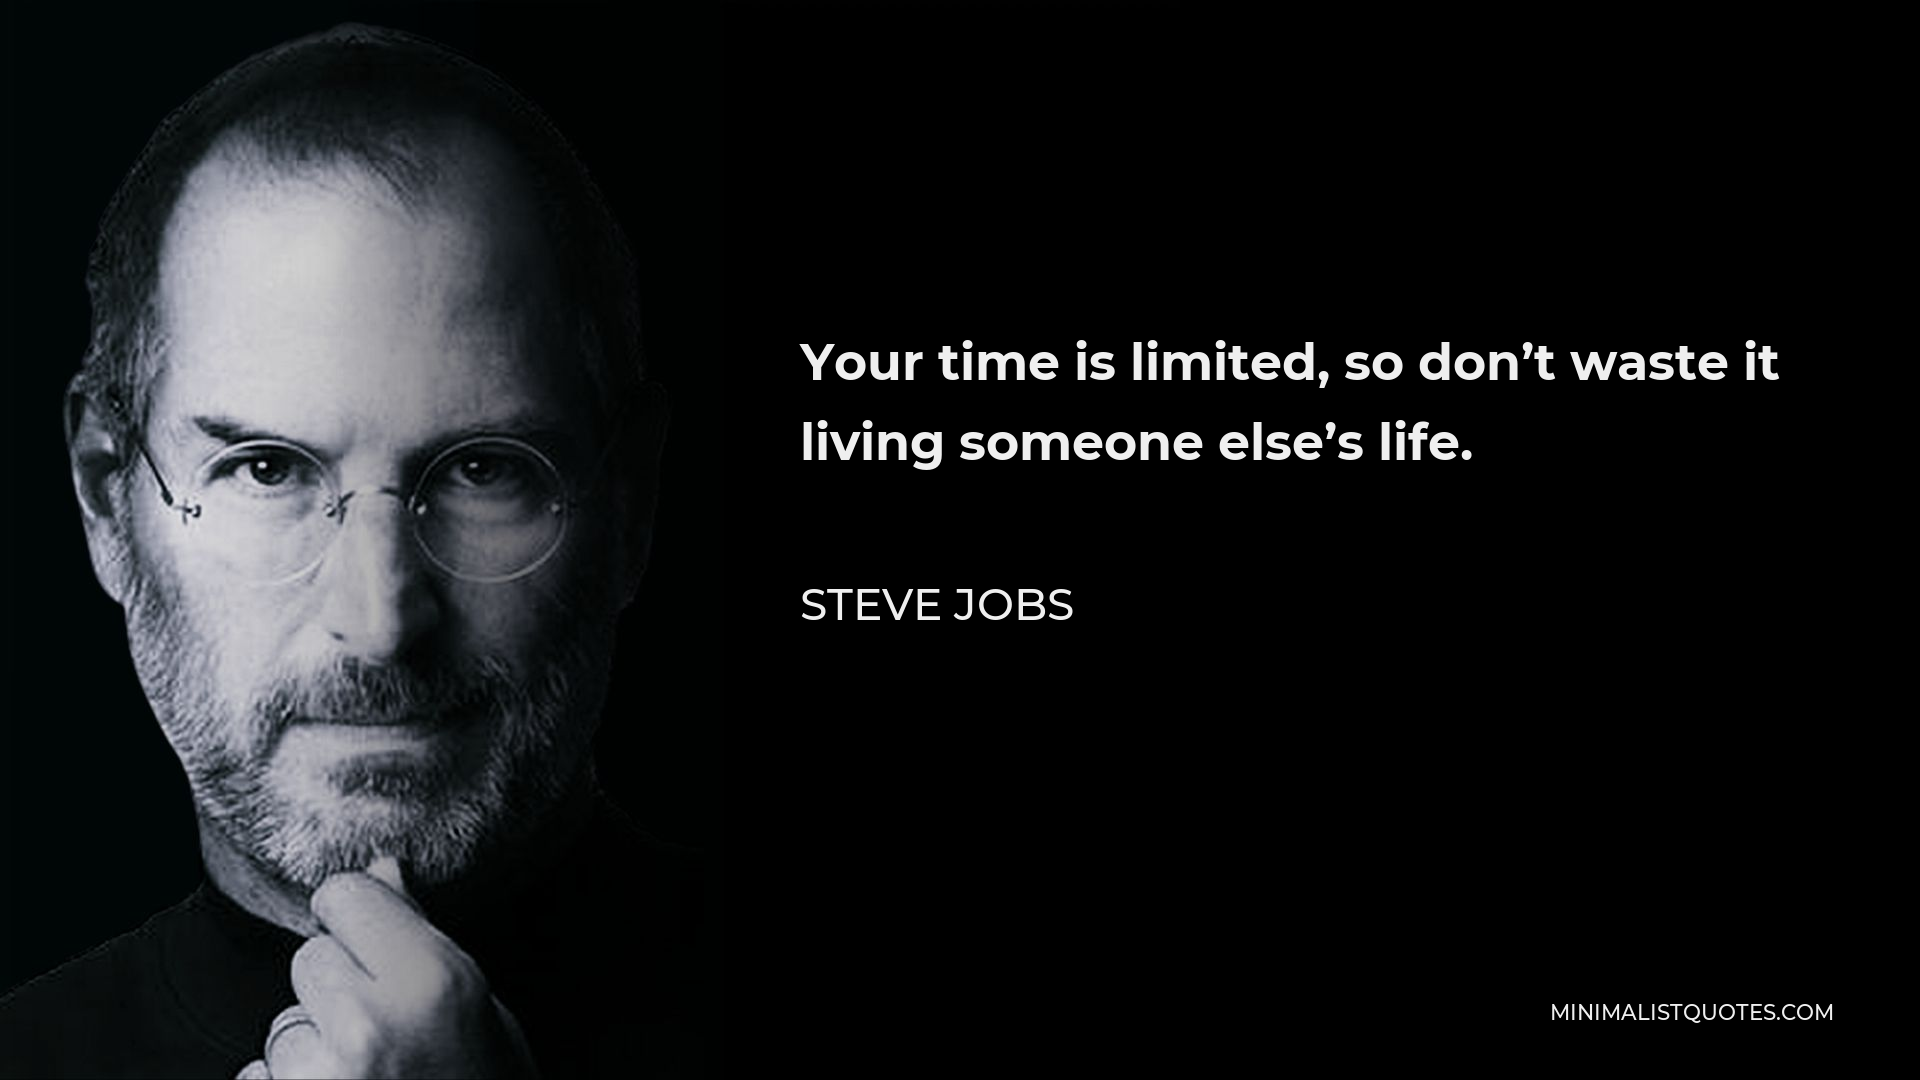 Steve Jobs Quote - Your time is limited, so don’t waste it living someone else’s life.